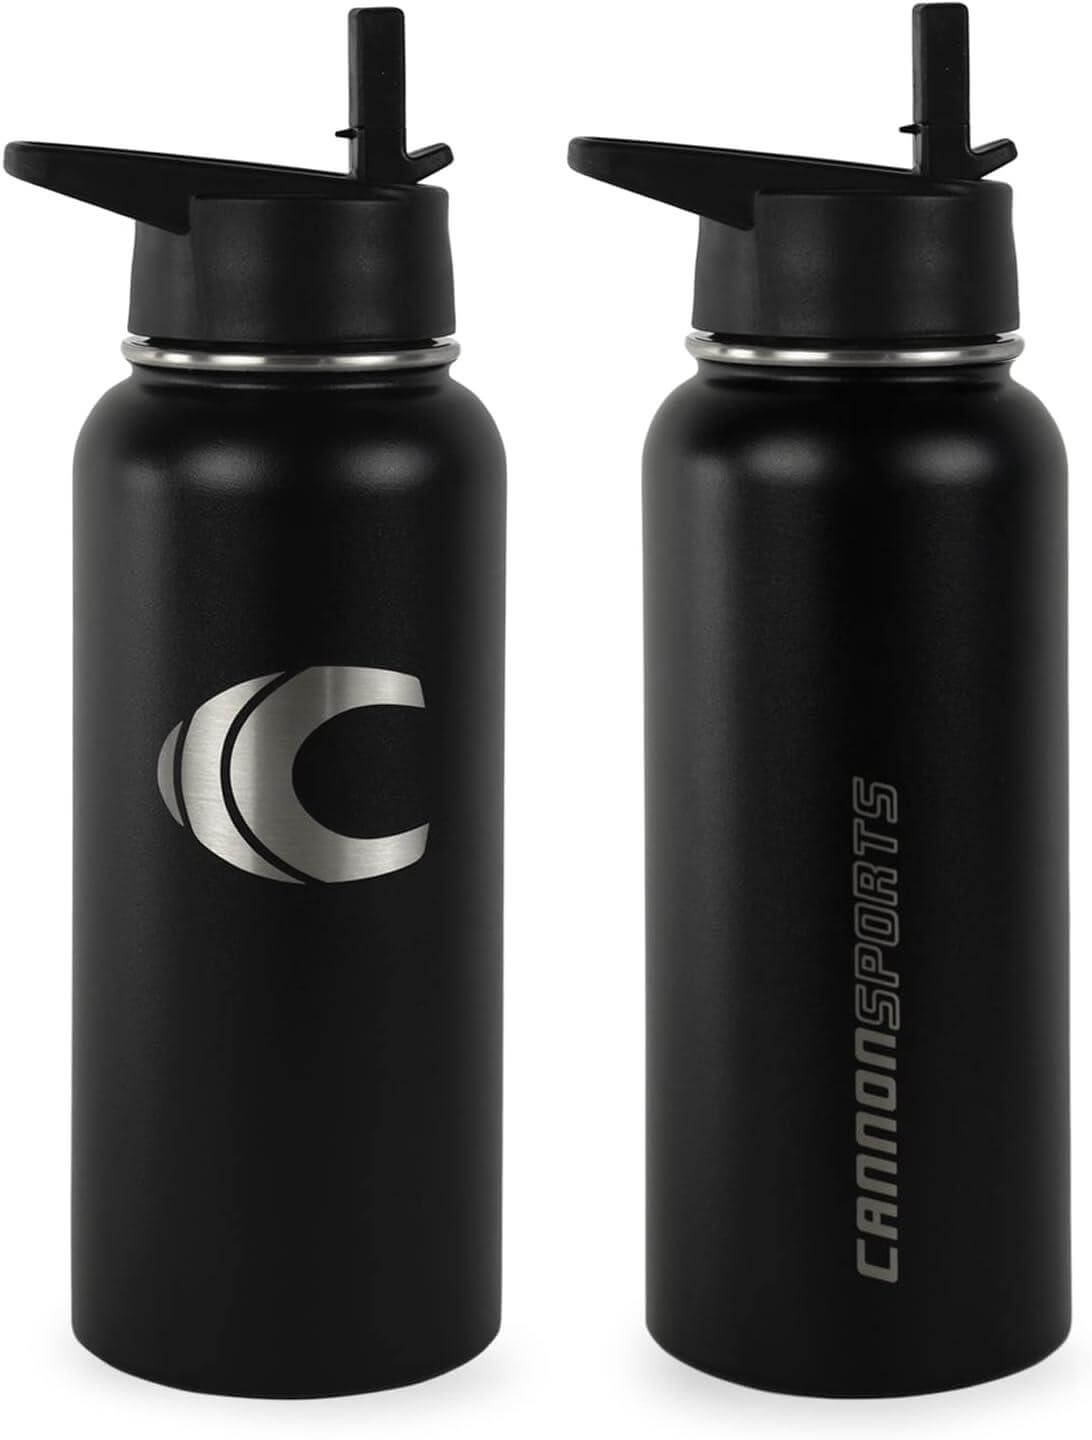 Cannon Sports Stainless Steel Triple Insulated Water Bottle, Black - Cannon Sports